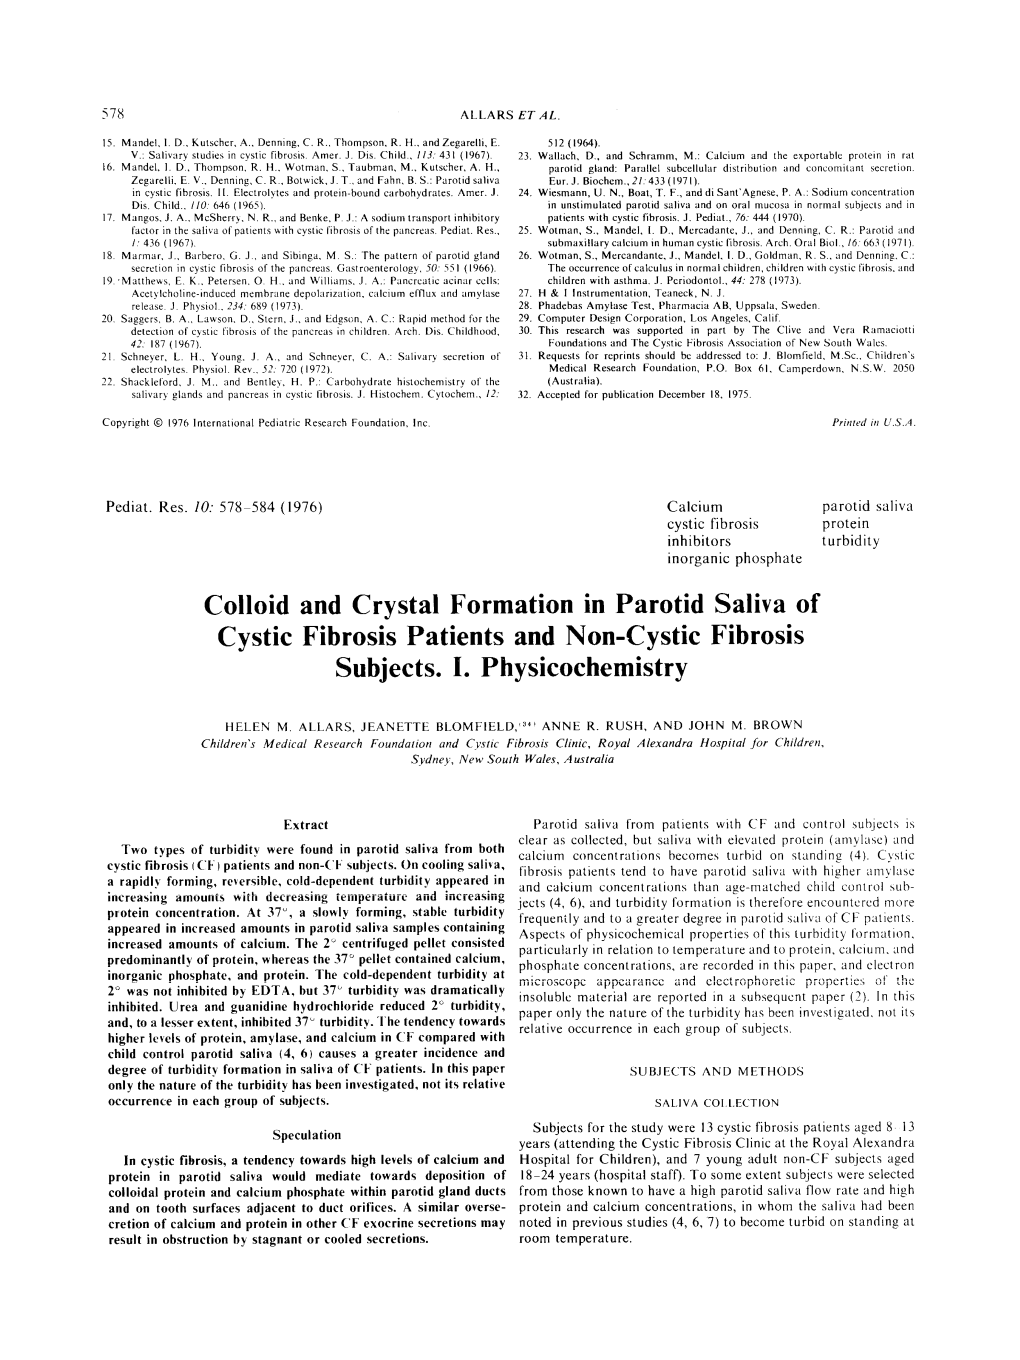 Colloid and Crystal Formation in Parotid Saliva of Cystic Fibrosis Patients and Non-Cystic Fibrosis Subjects. I. Physicochemistry